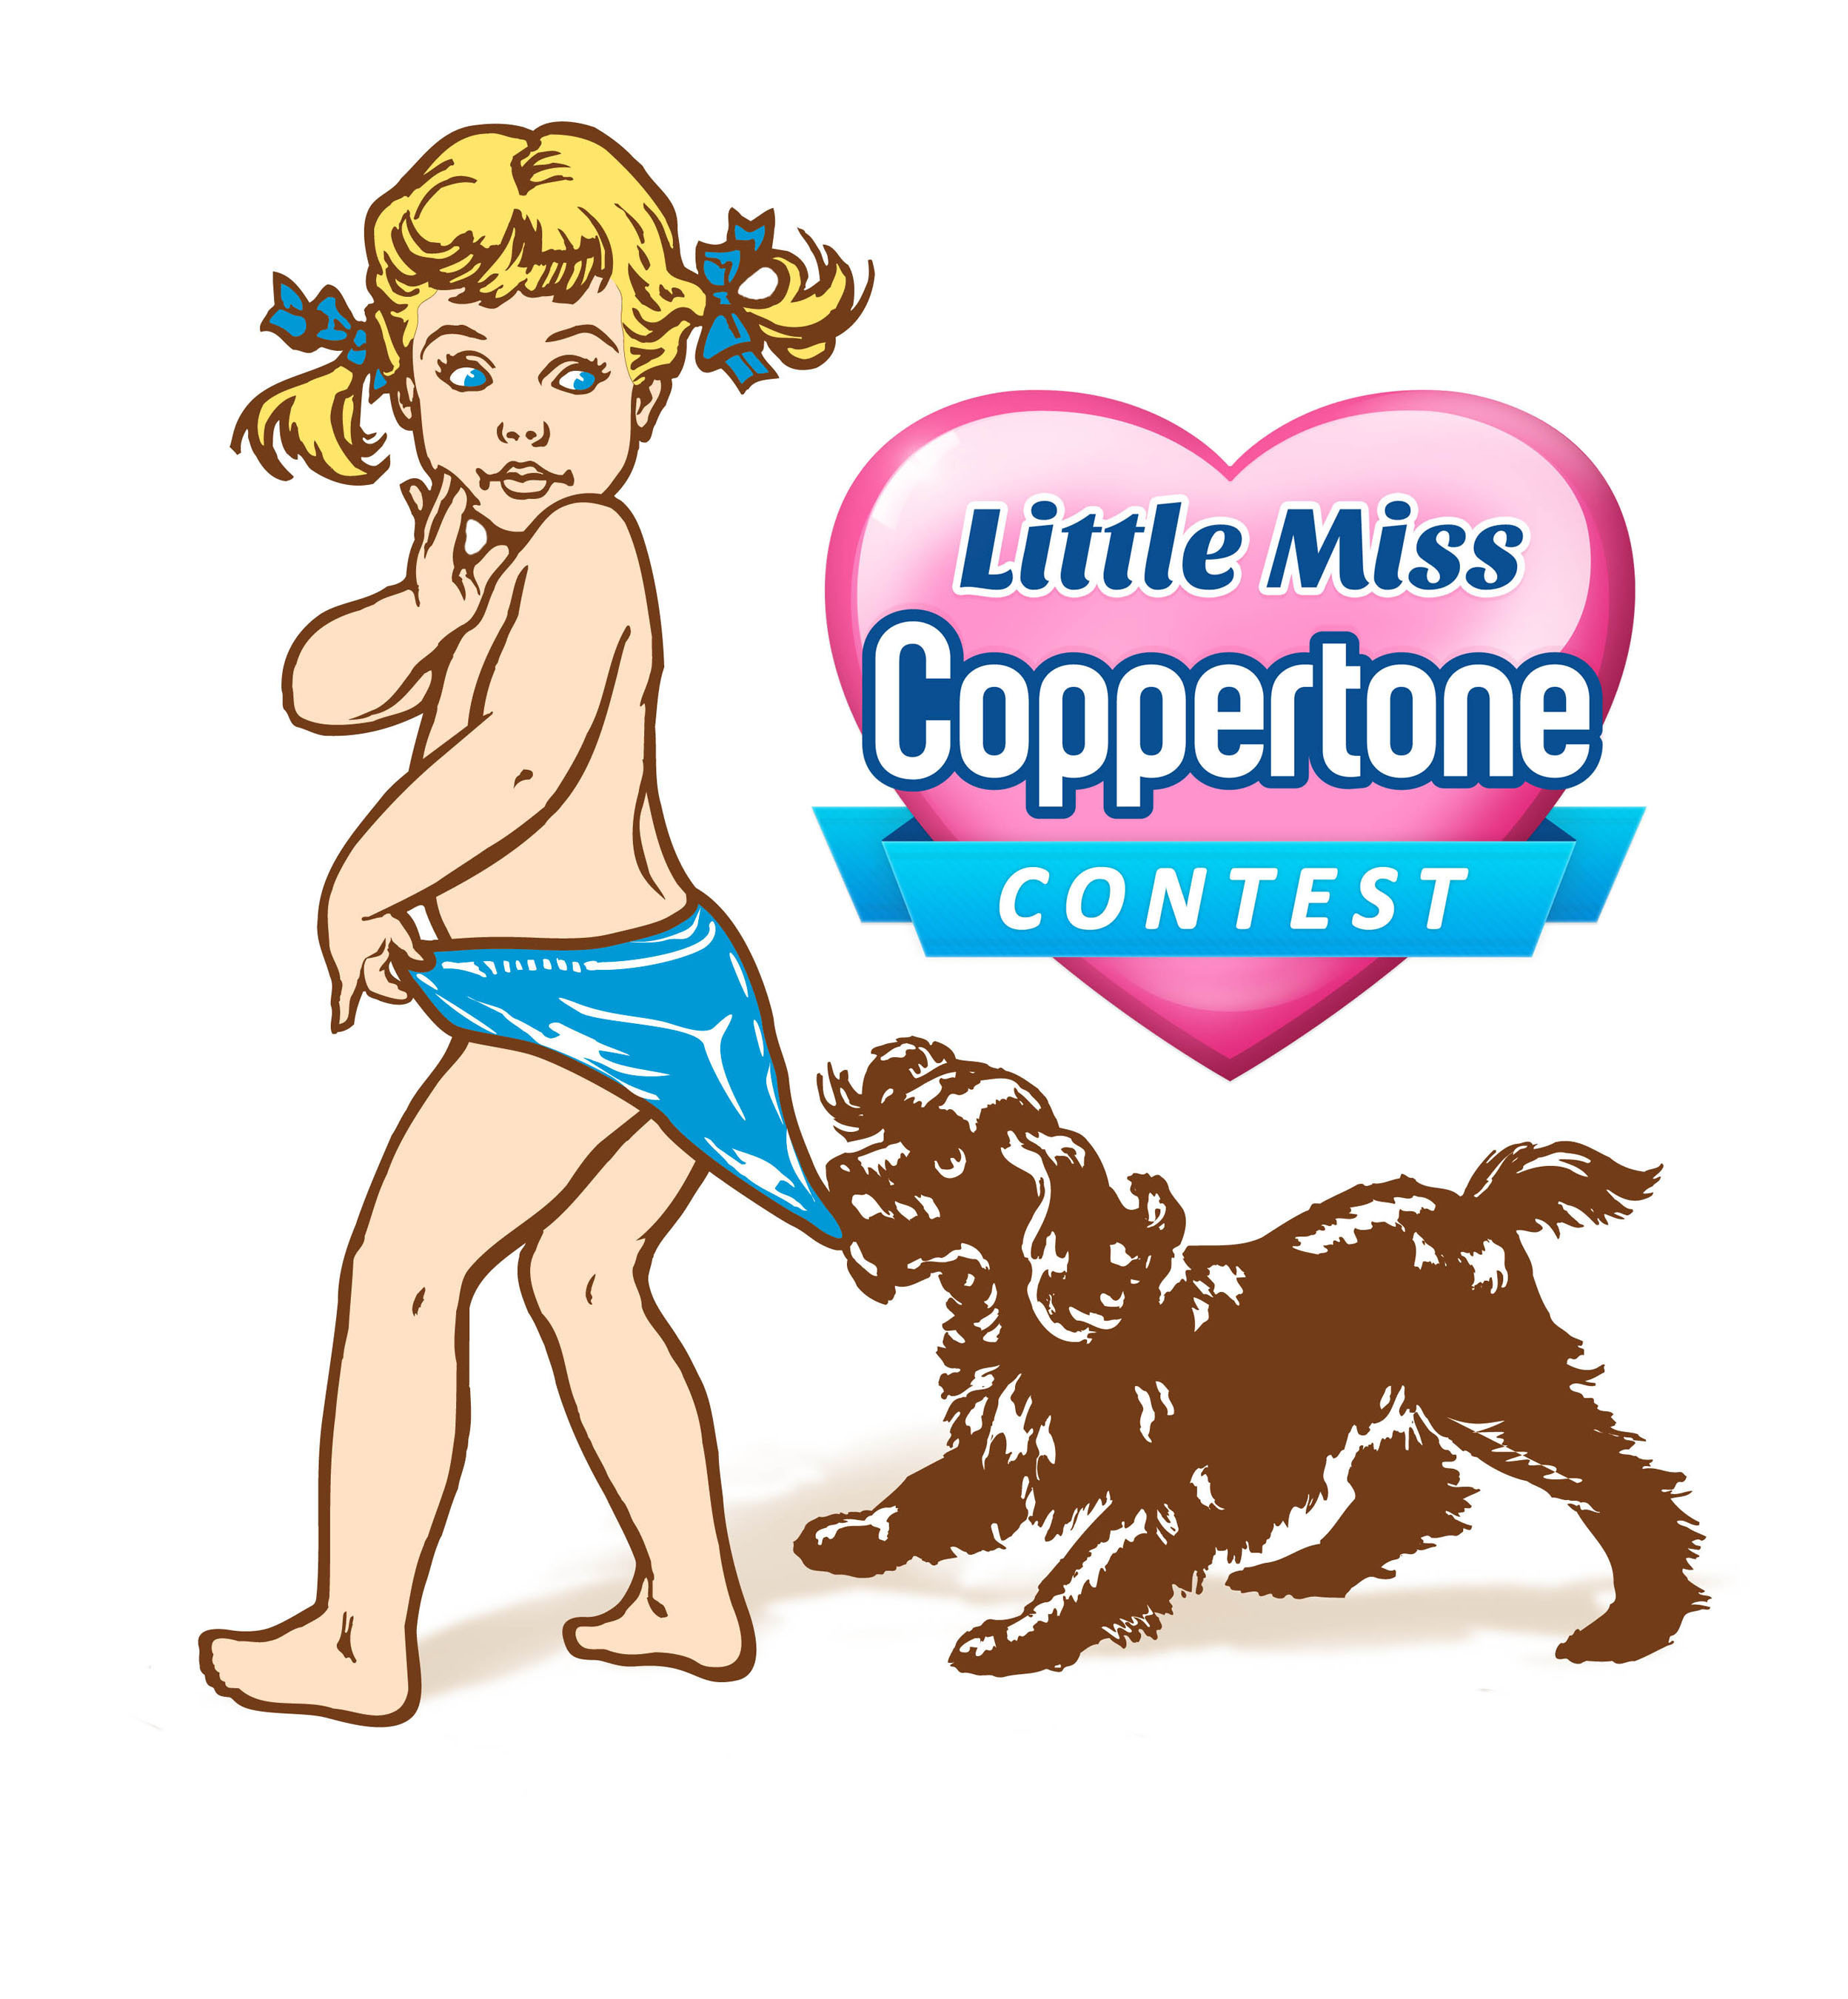 COPPERTONE Launches Nationwide Contest in Search of Modern Little Miss  Coppertone